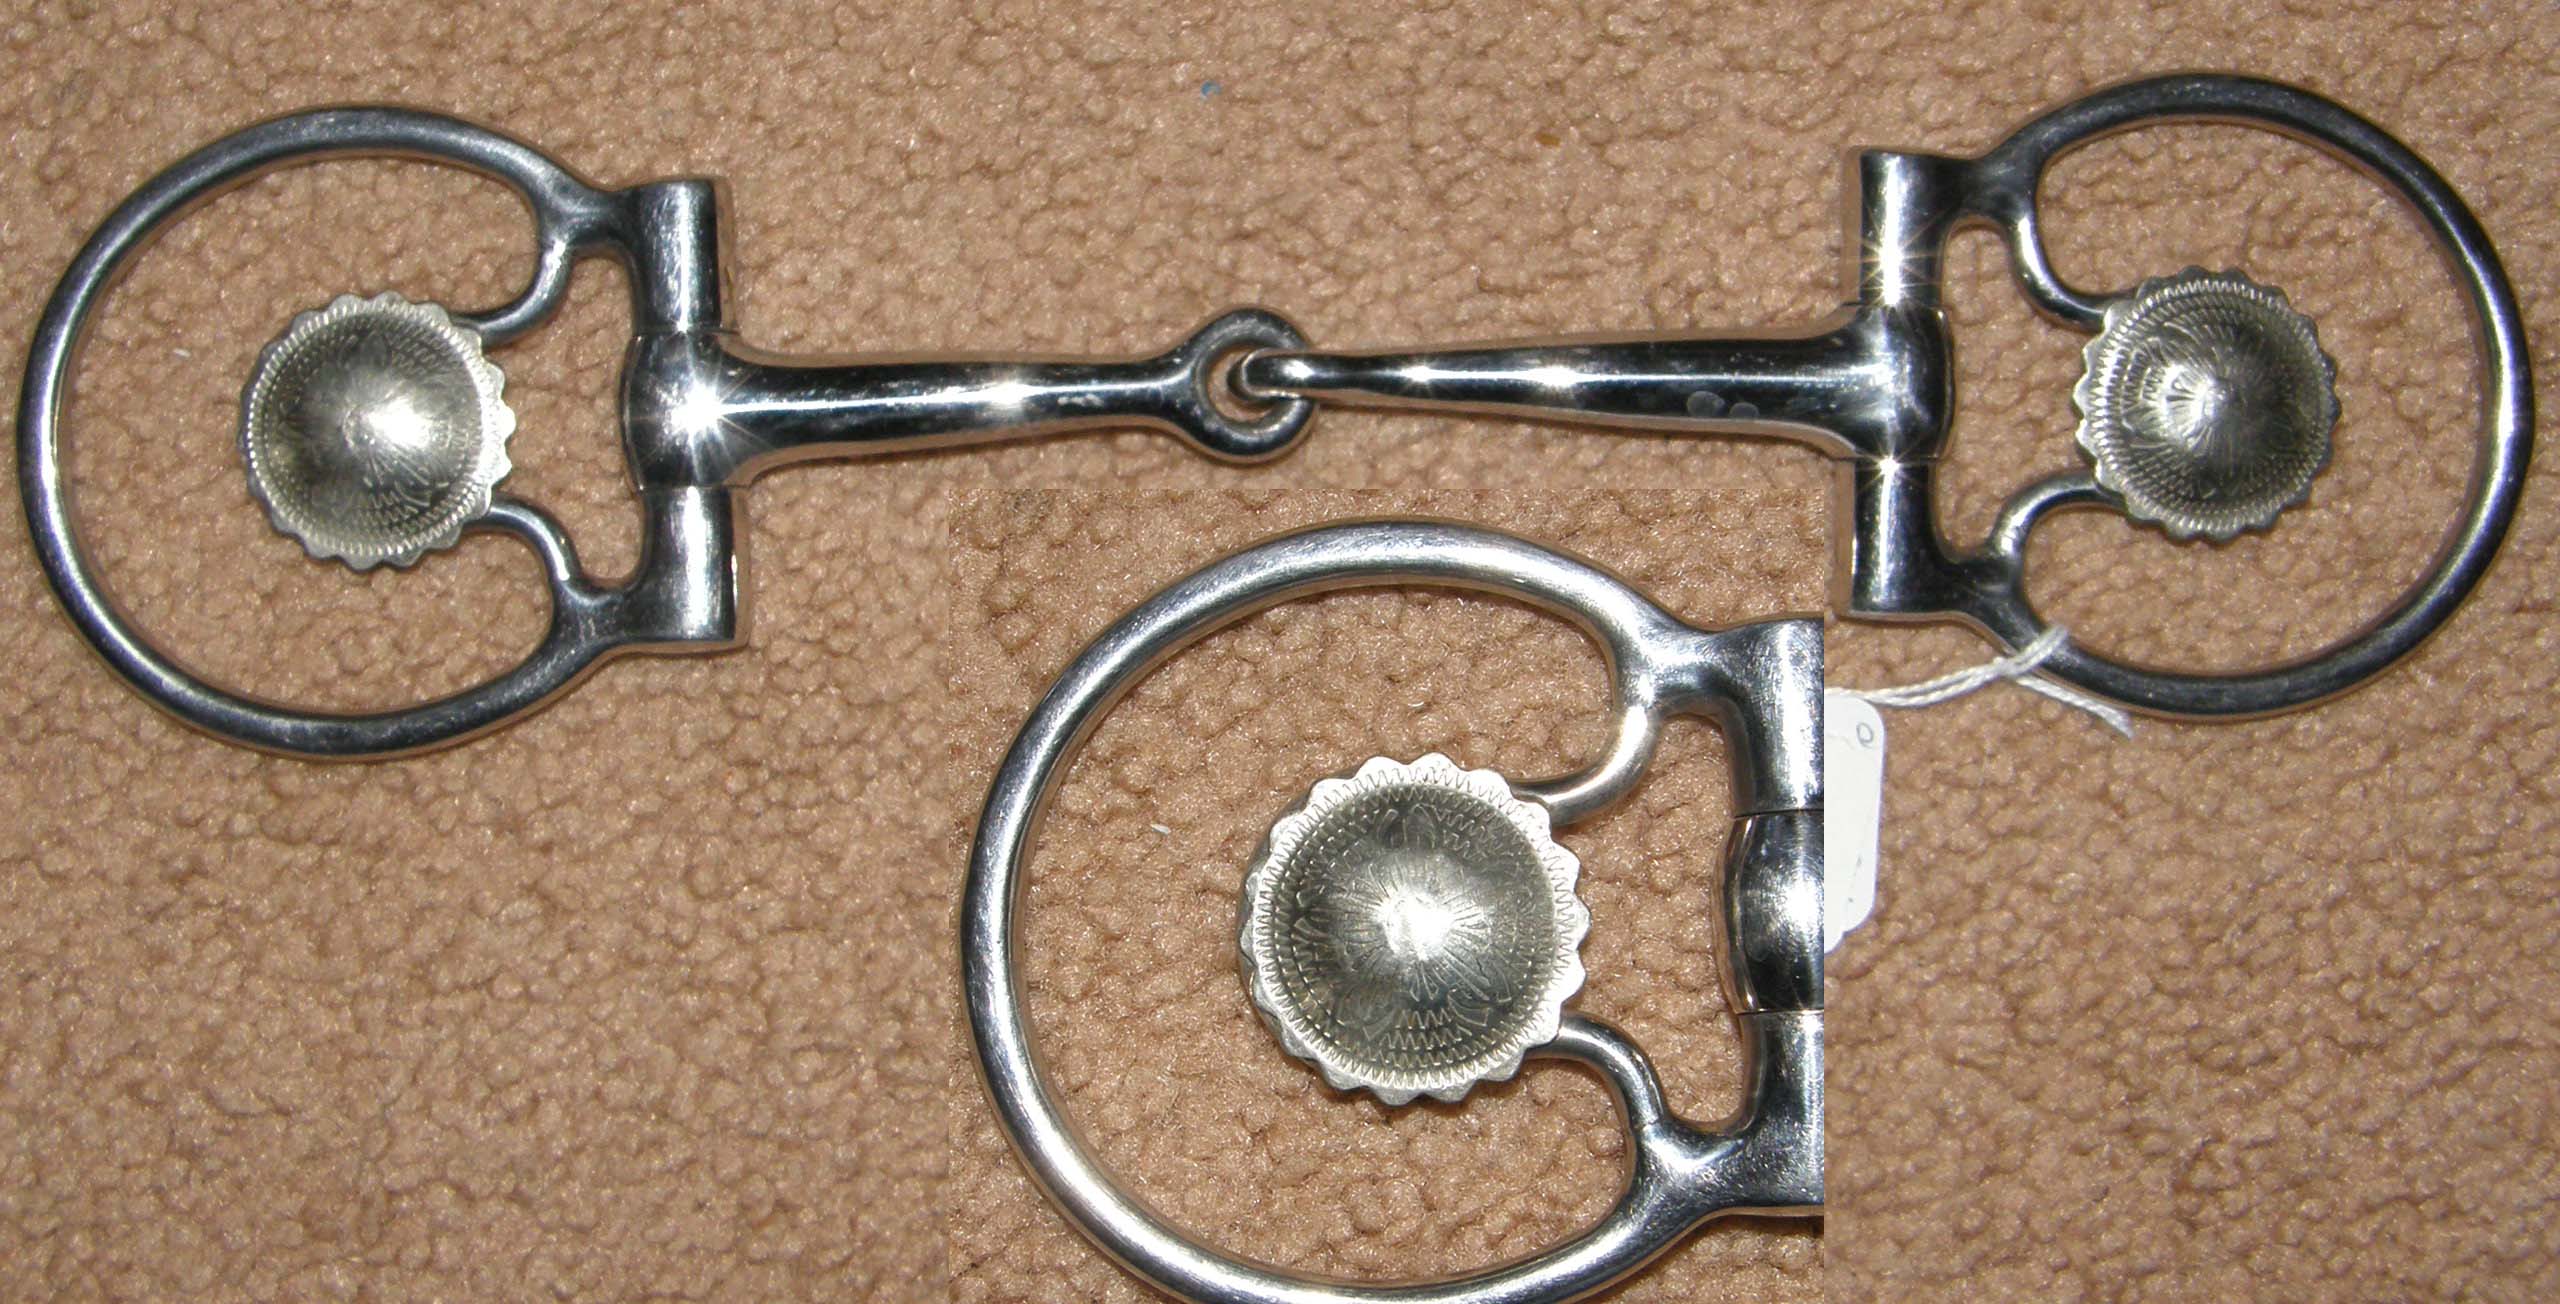 5" Jointed Snaffle Bit Futurity Snaffle Bit Engraved Silver Concho Western Snaffle Bit